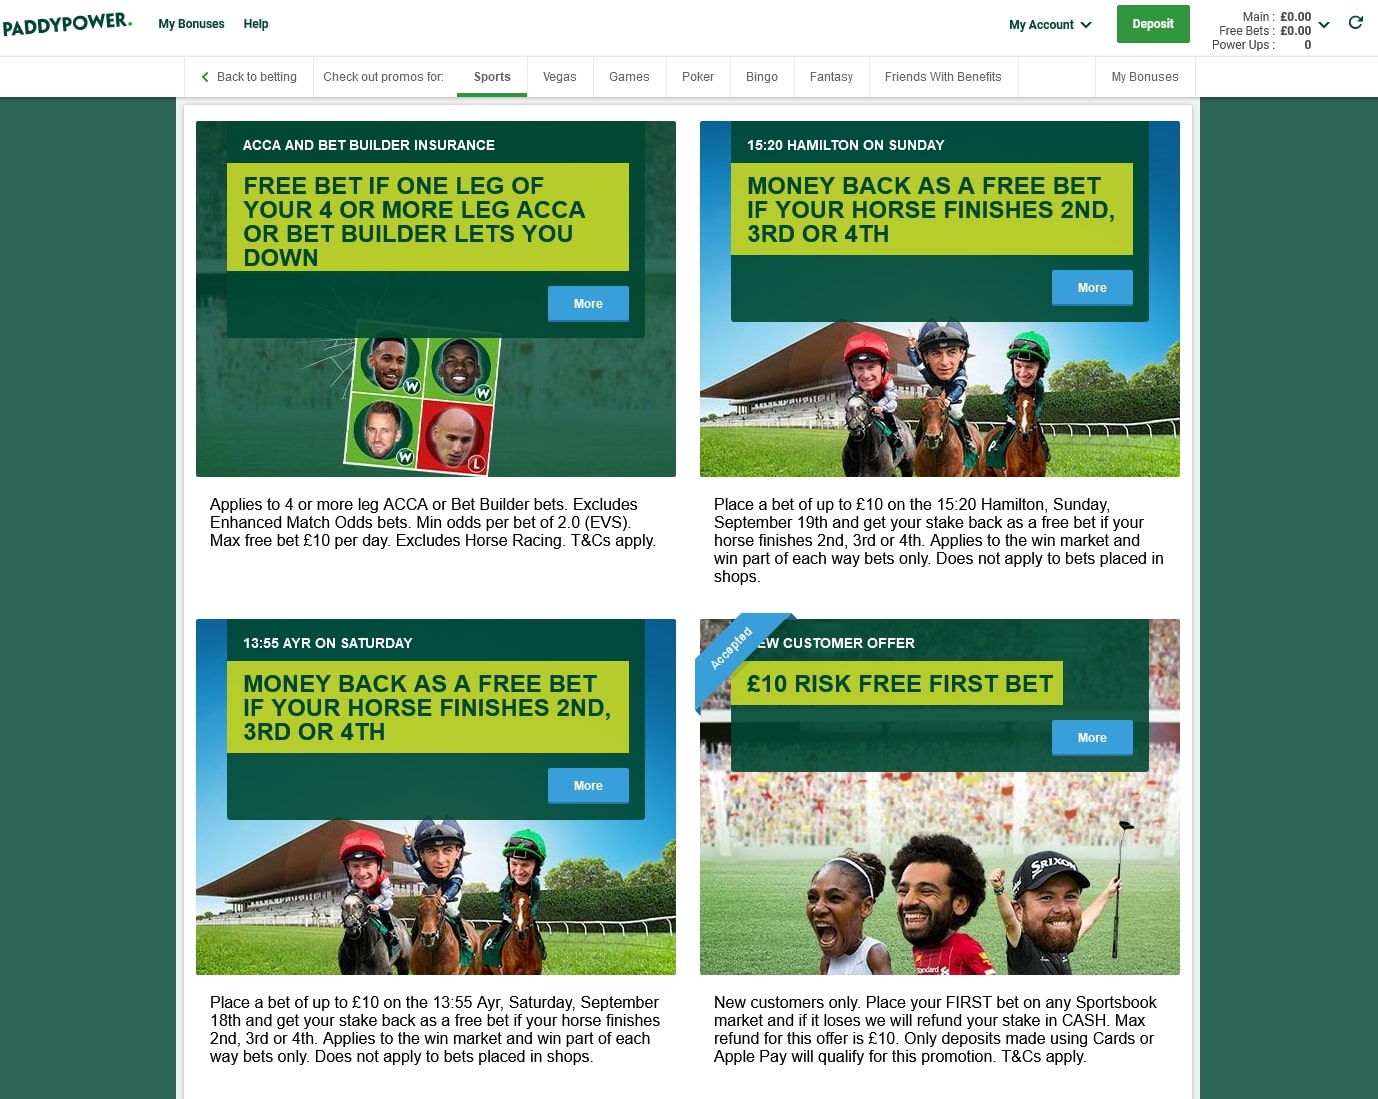 Paddy Power's generous offers for existing customers.